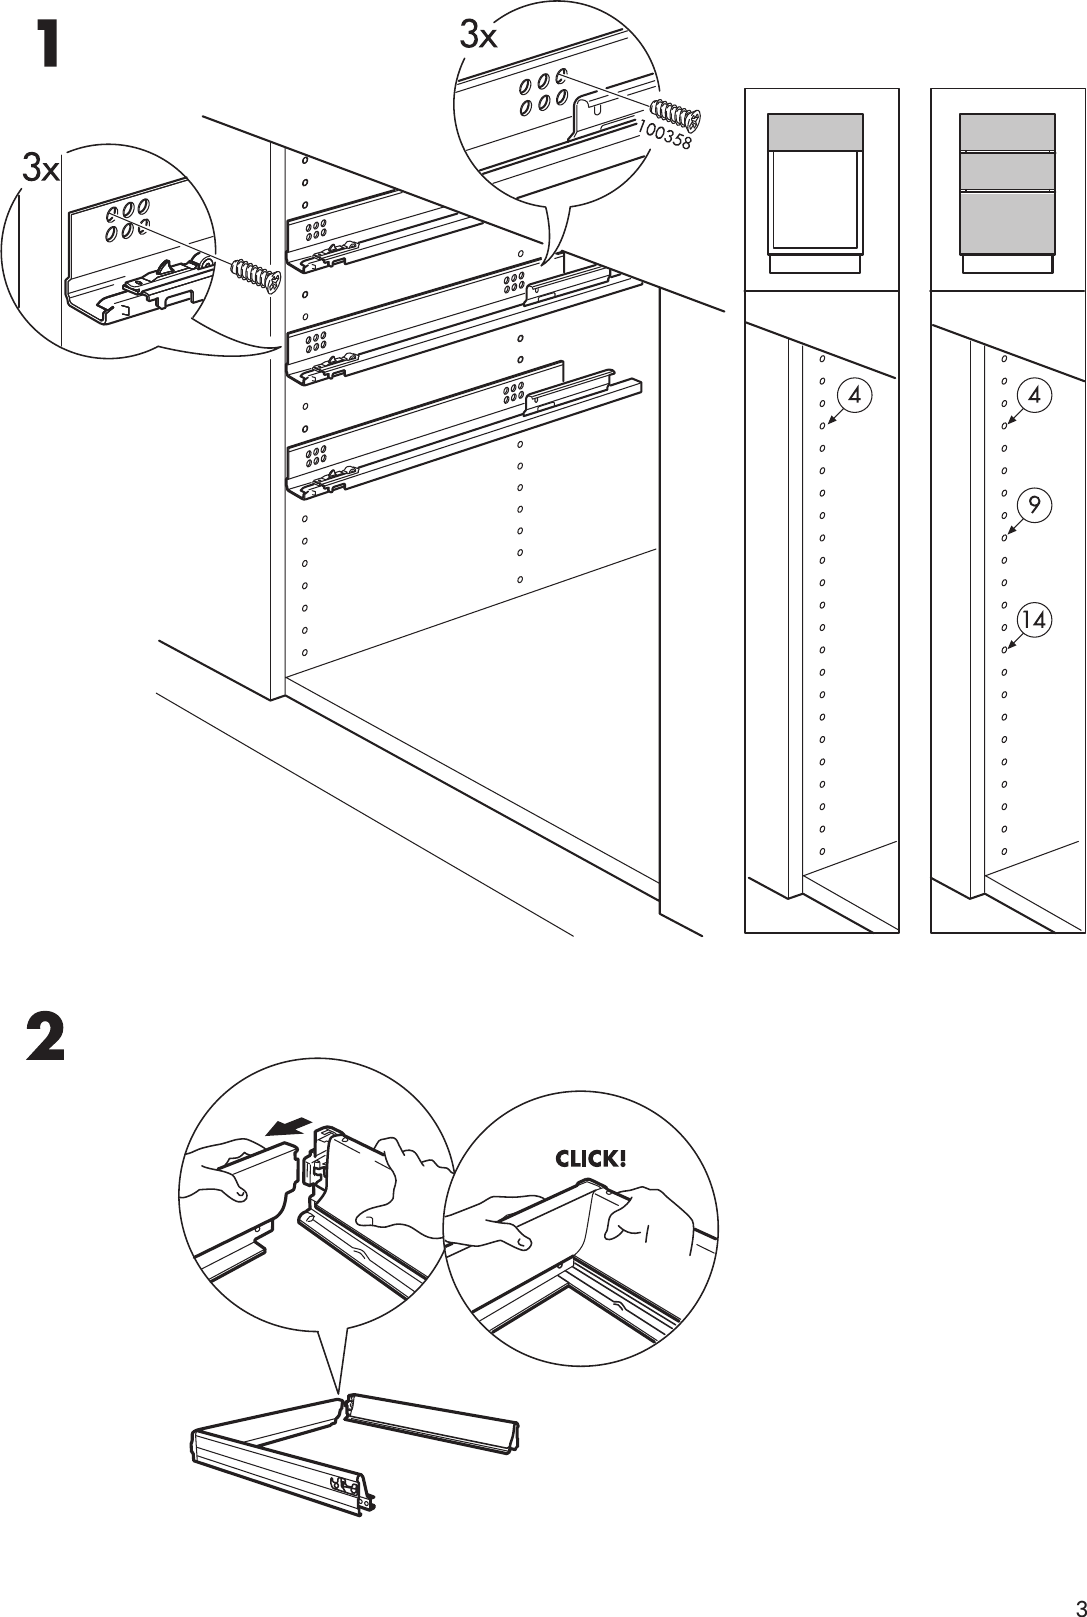 Page 3 of 8 - Ikea Ikea-Rationell-Full-Extending-Drawer-24-Assembly-Instruction